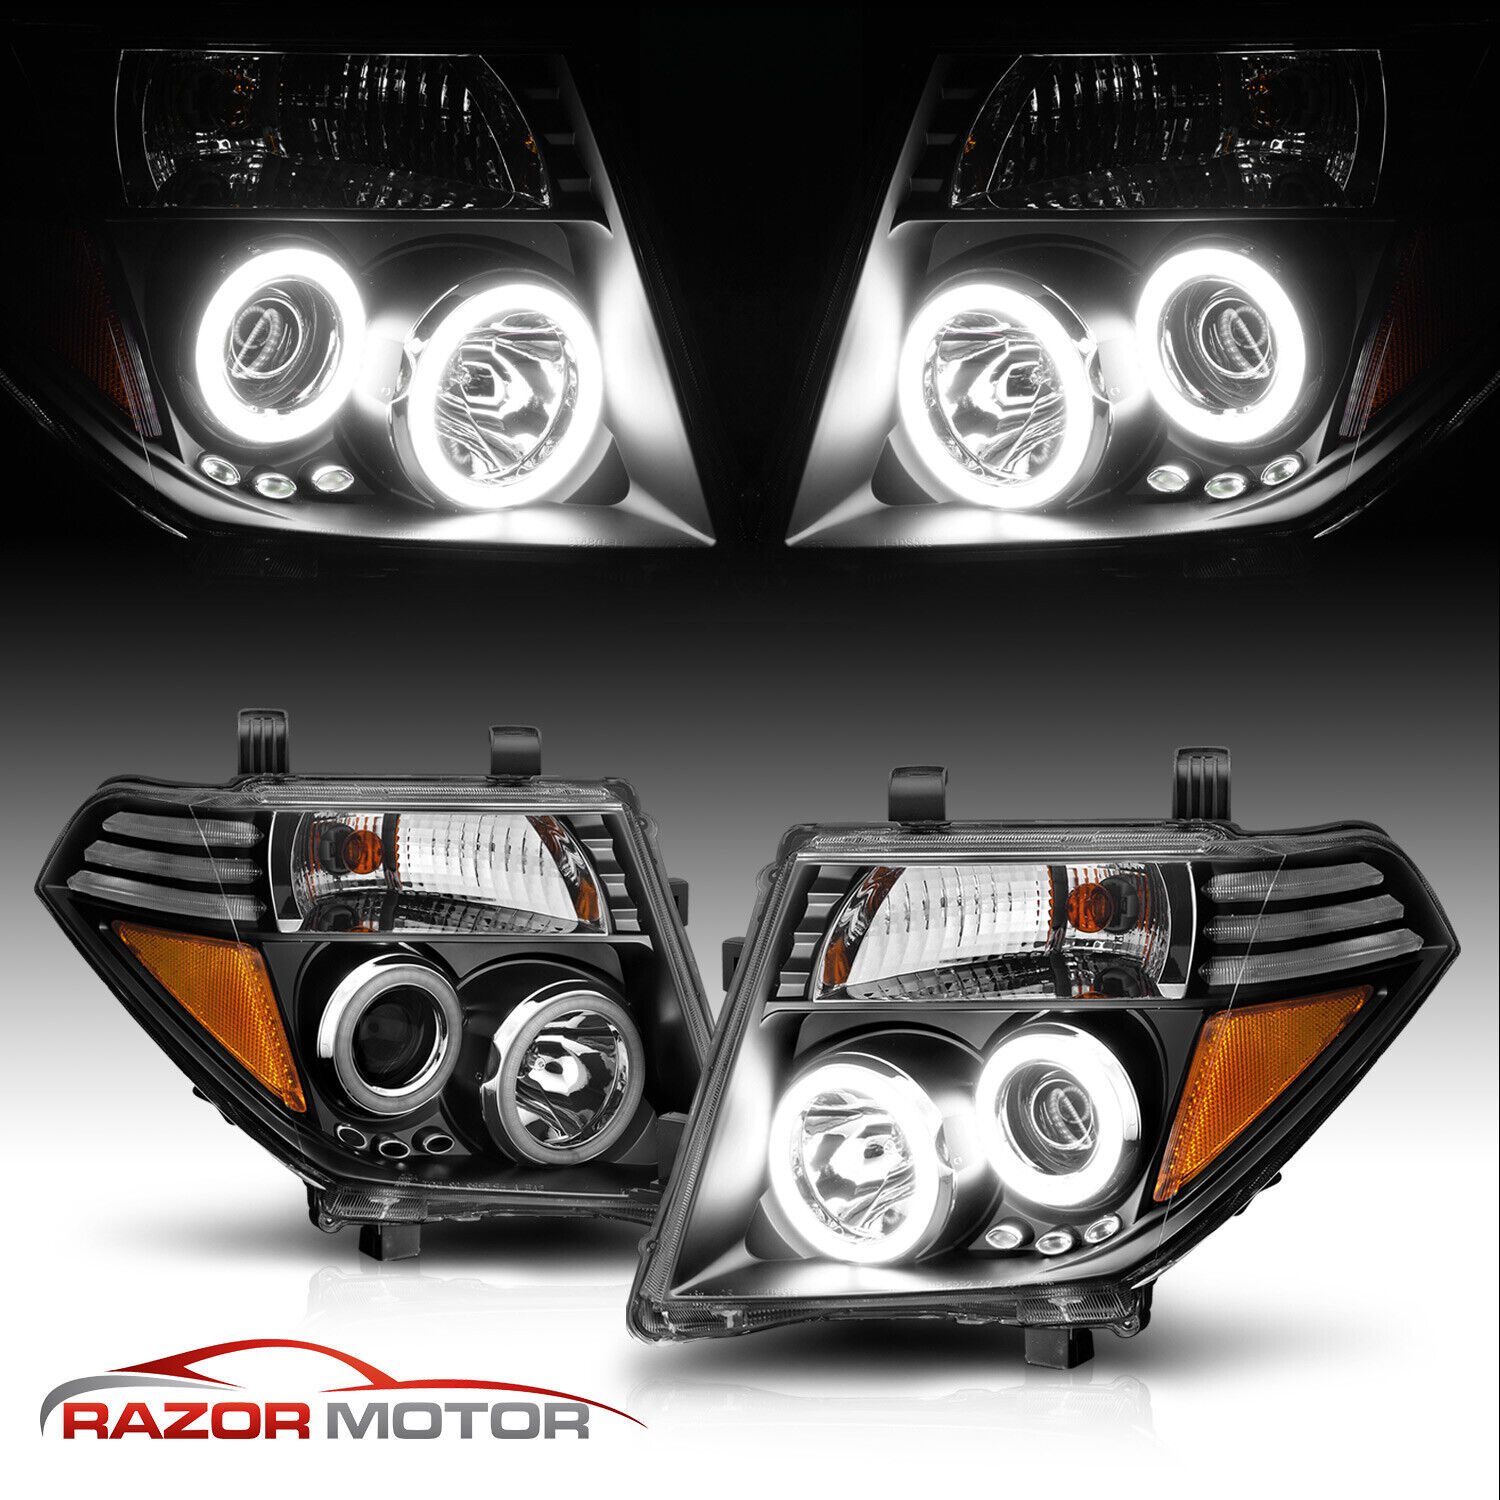 [LED Halo]For 05-08 Nissan Frontier/Pathfinder LED Halo Projector Headlights